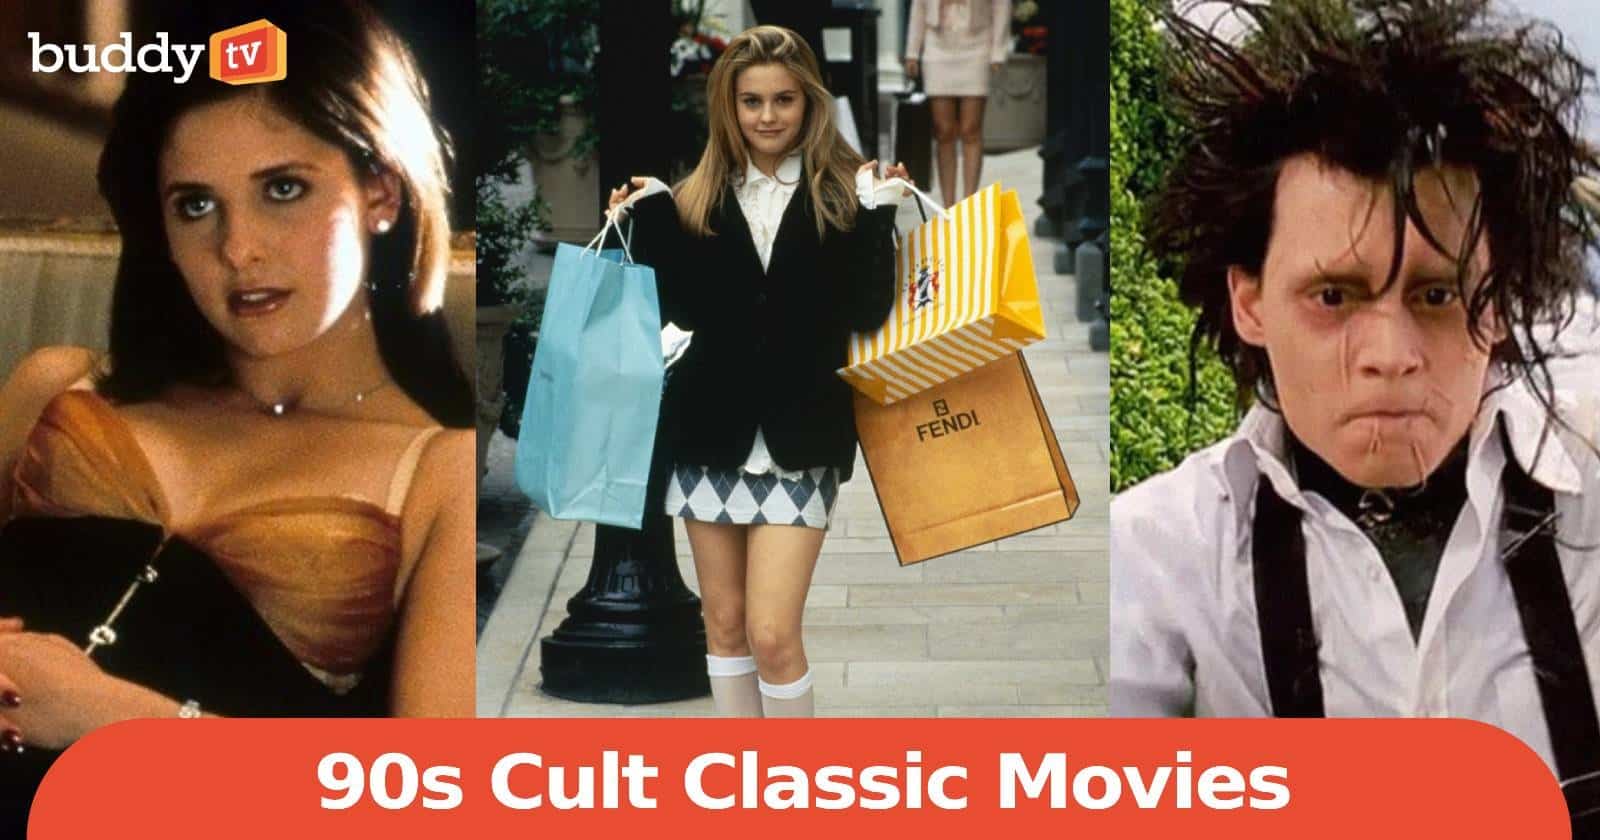 Revisiting 90s Cult Classics: 10 Movies That Defined a Generation